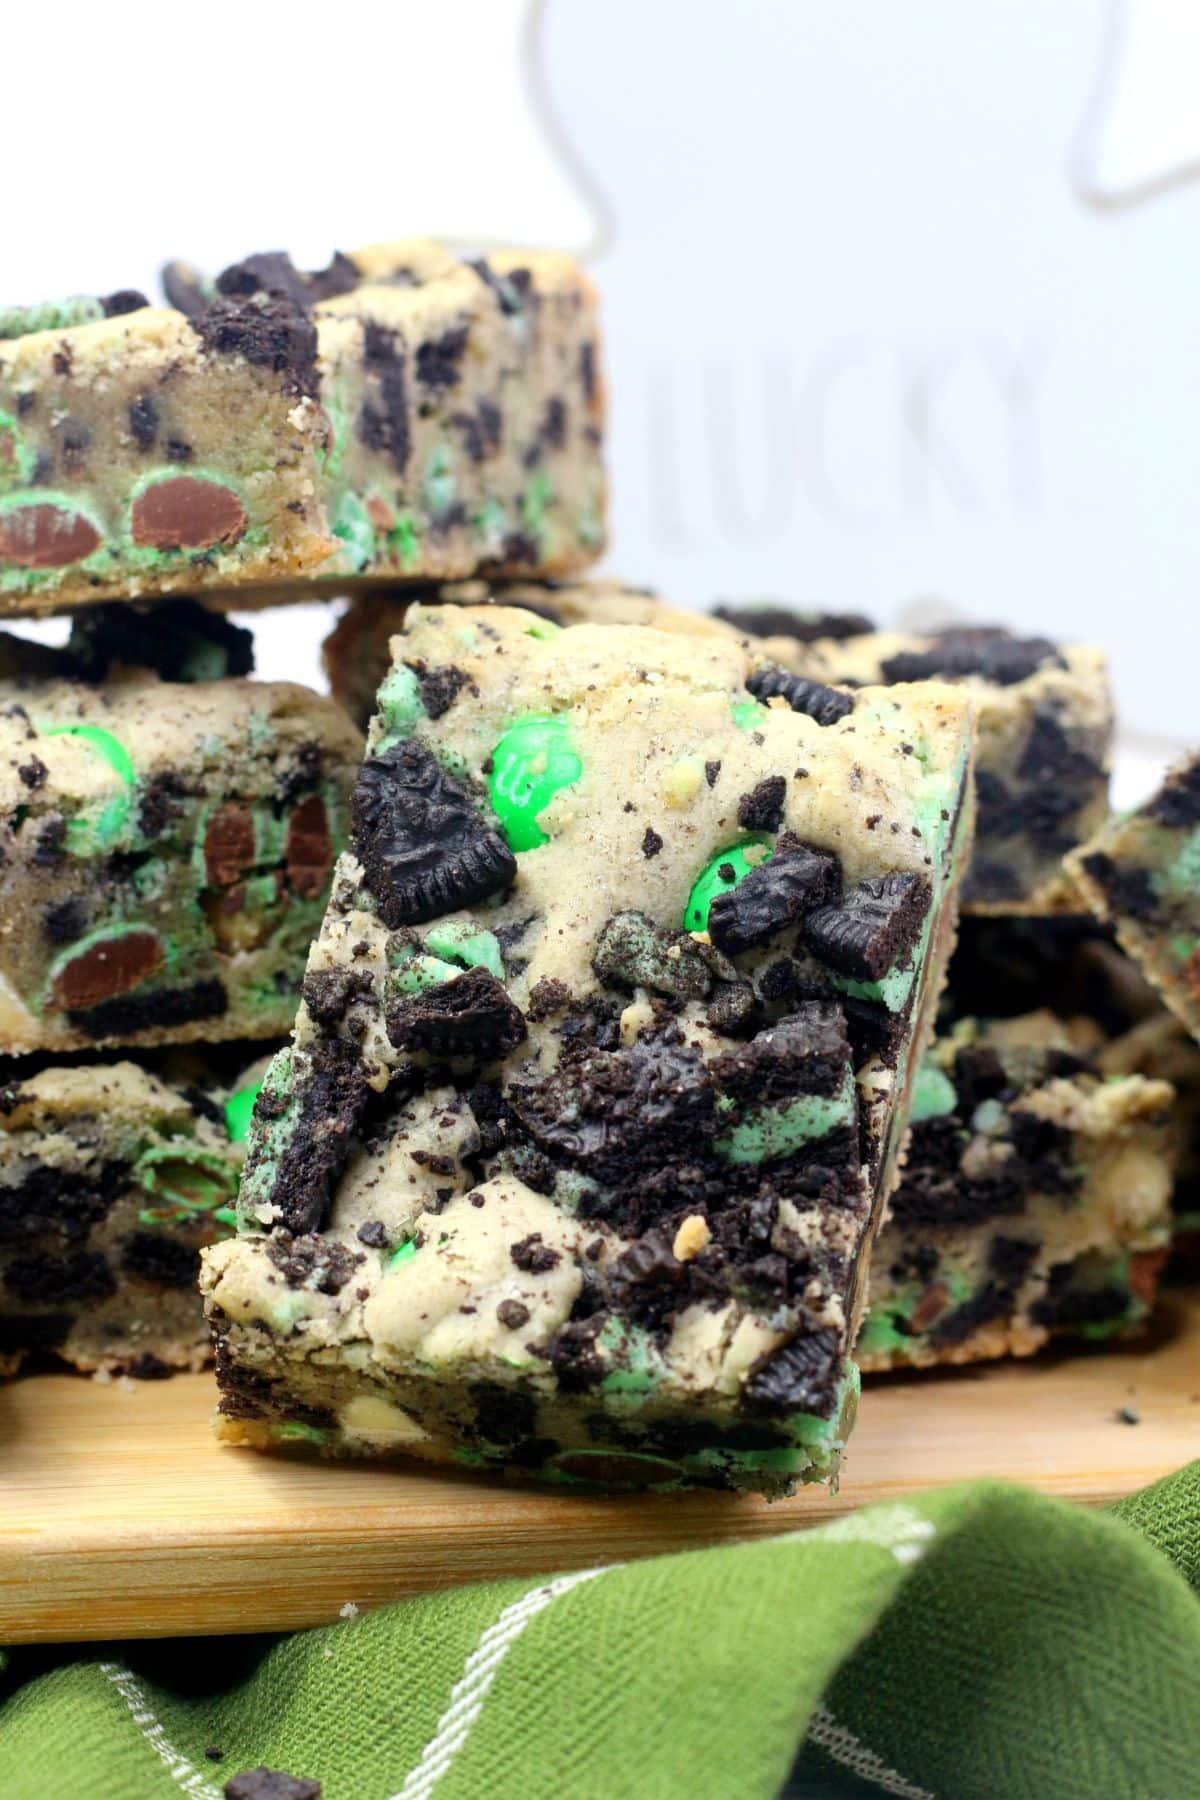 Cookie bars sit on a wooden board, surrounded by a green cloth.